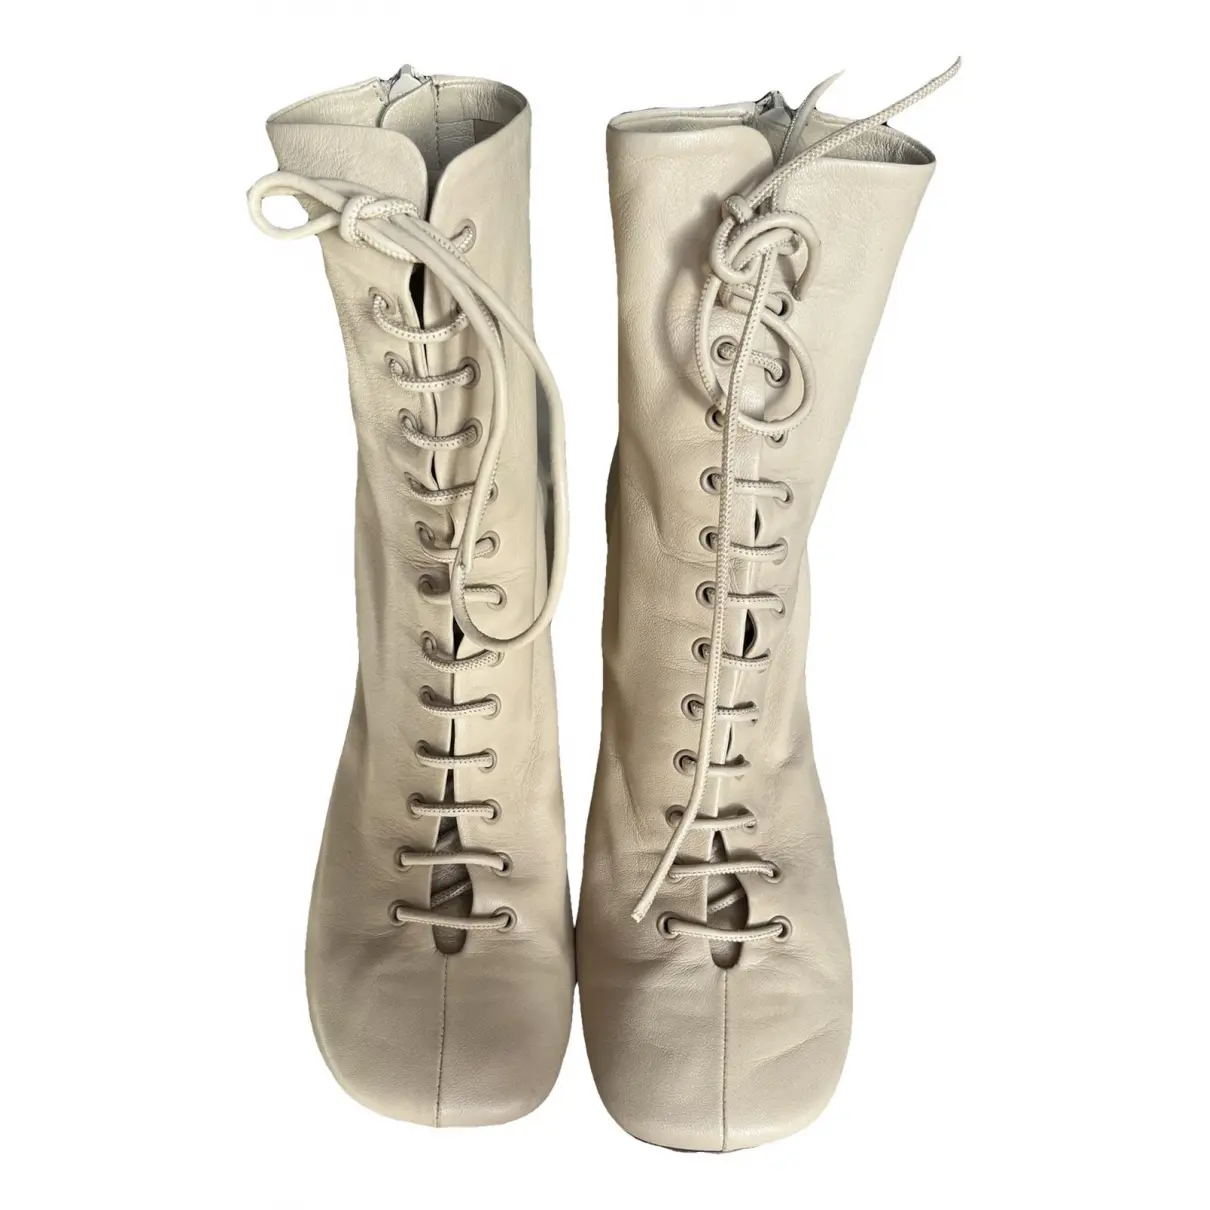 Glove Booties leather lace up boots